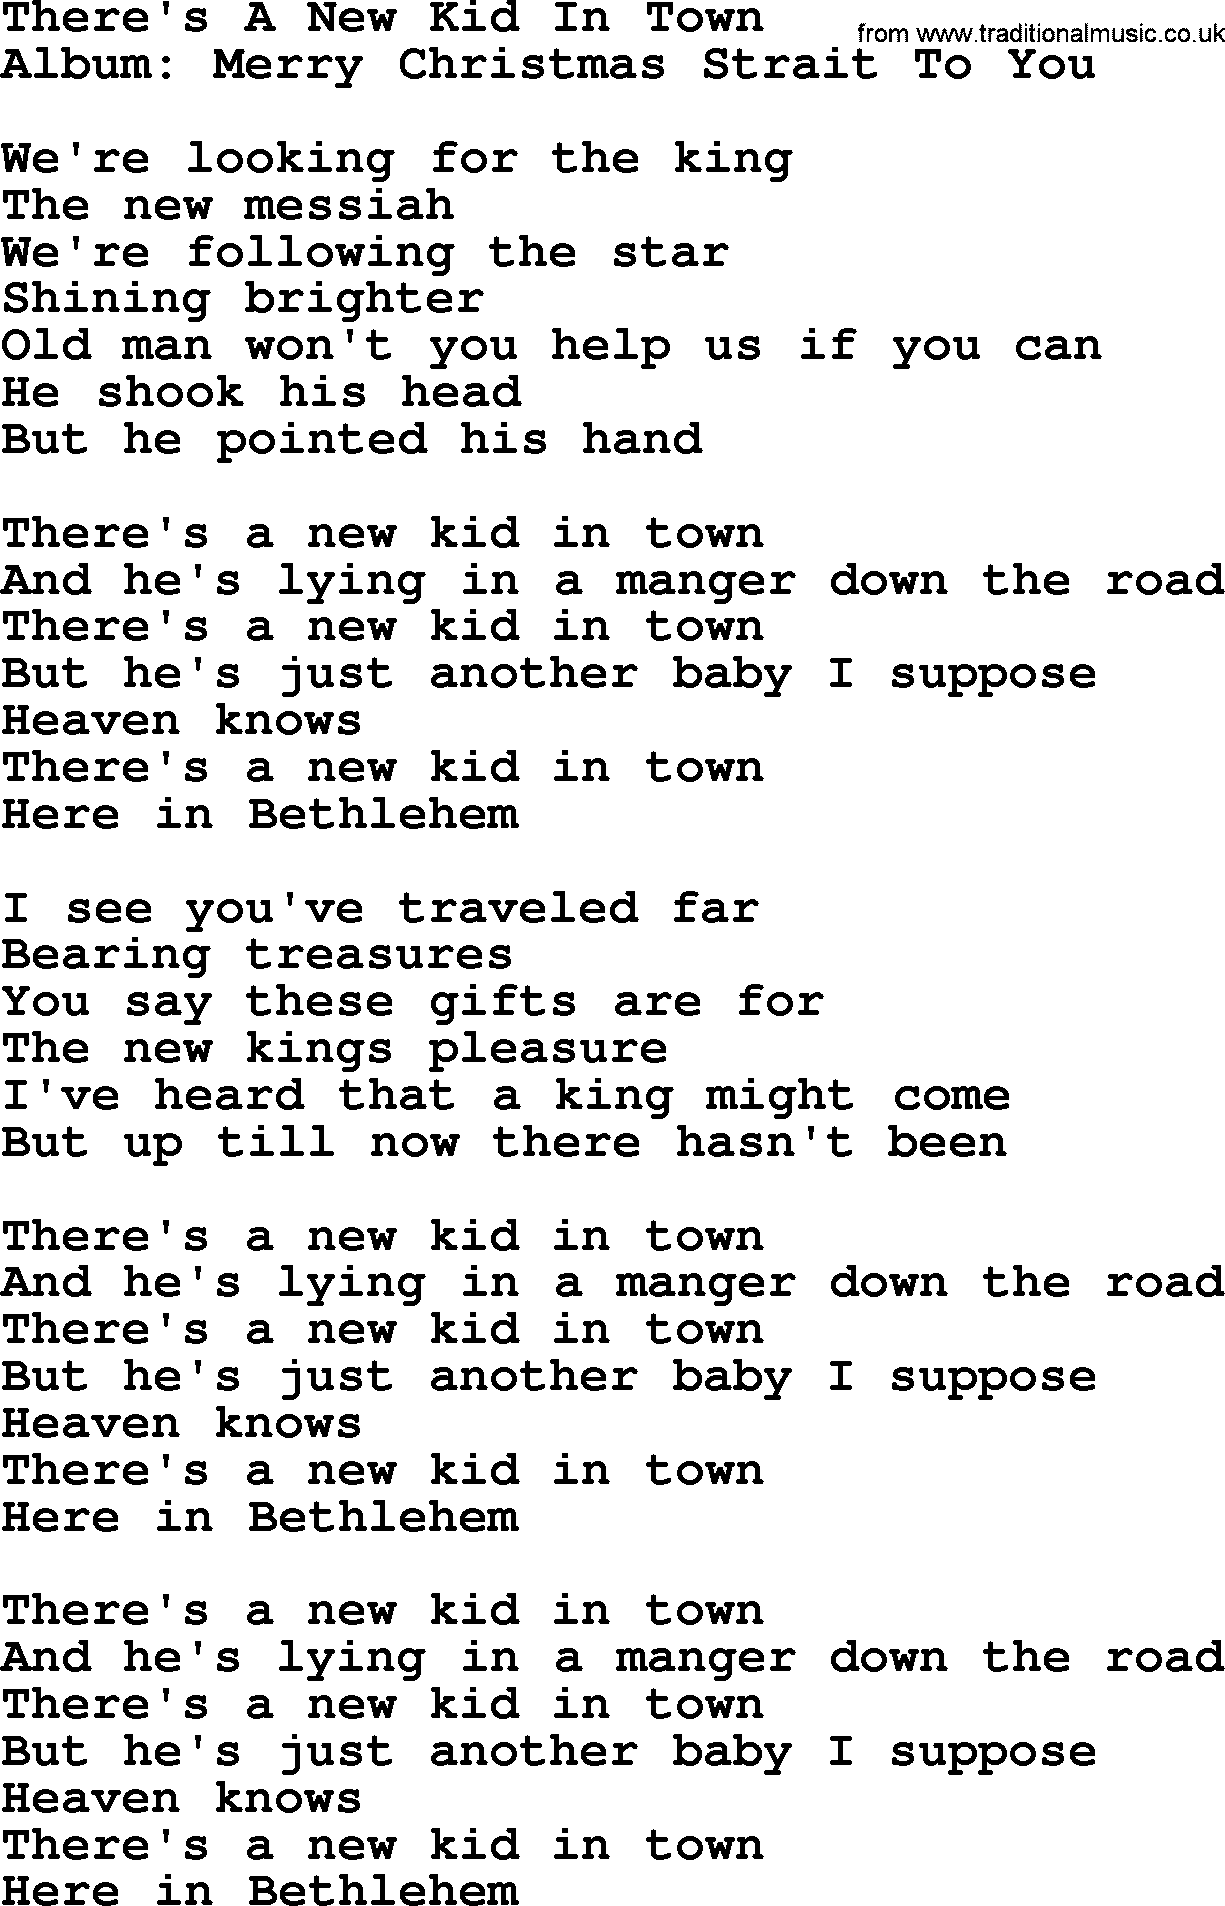 George Strait song: There's A New Kid In Town, lyrics